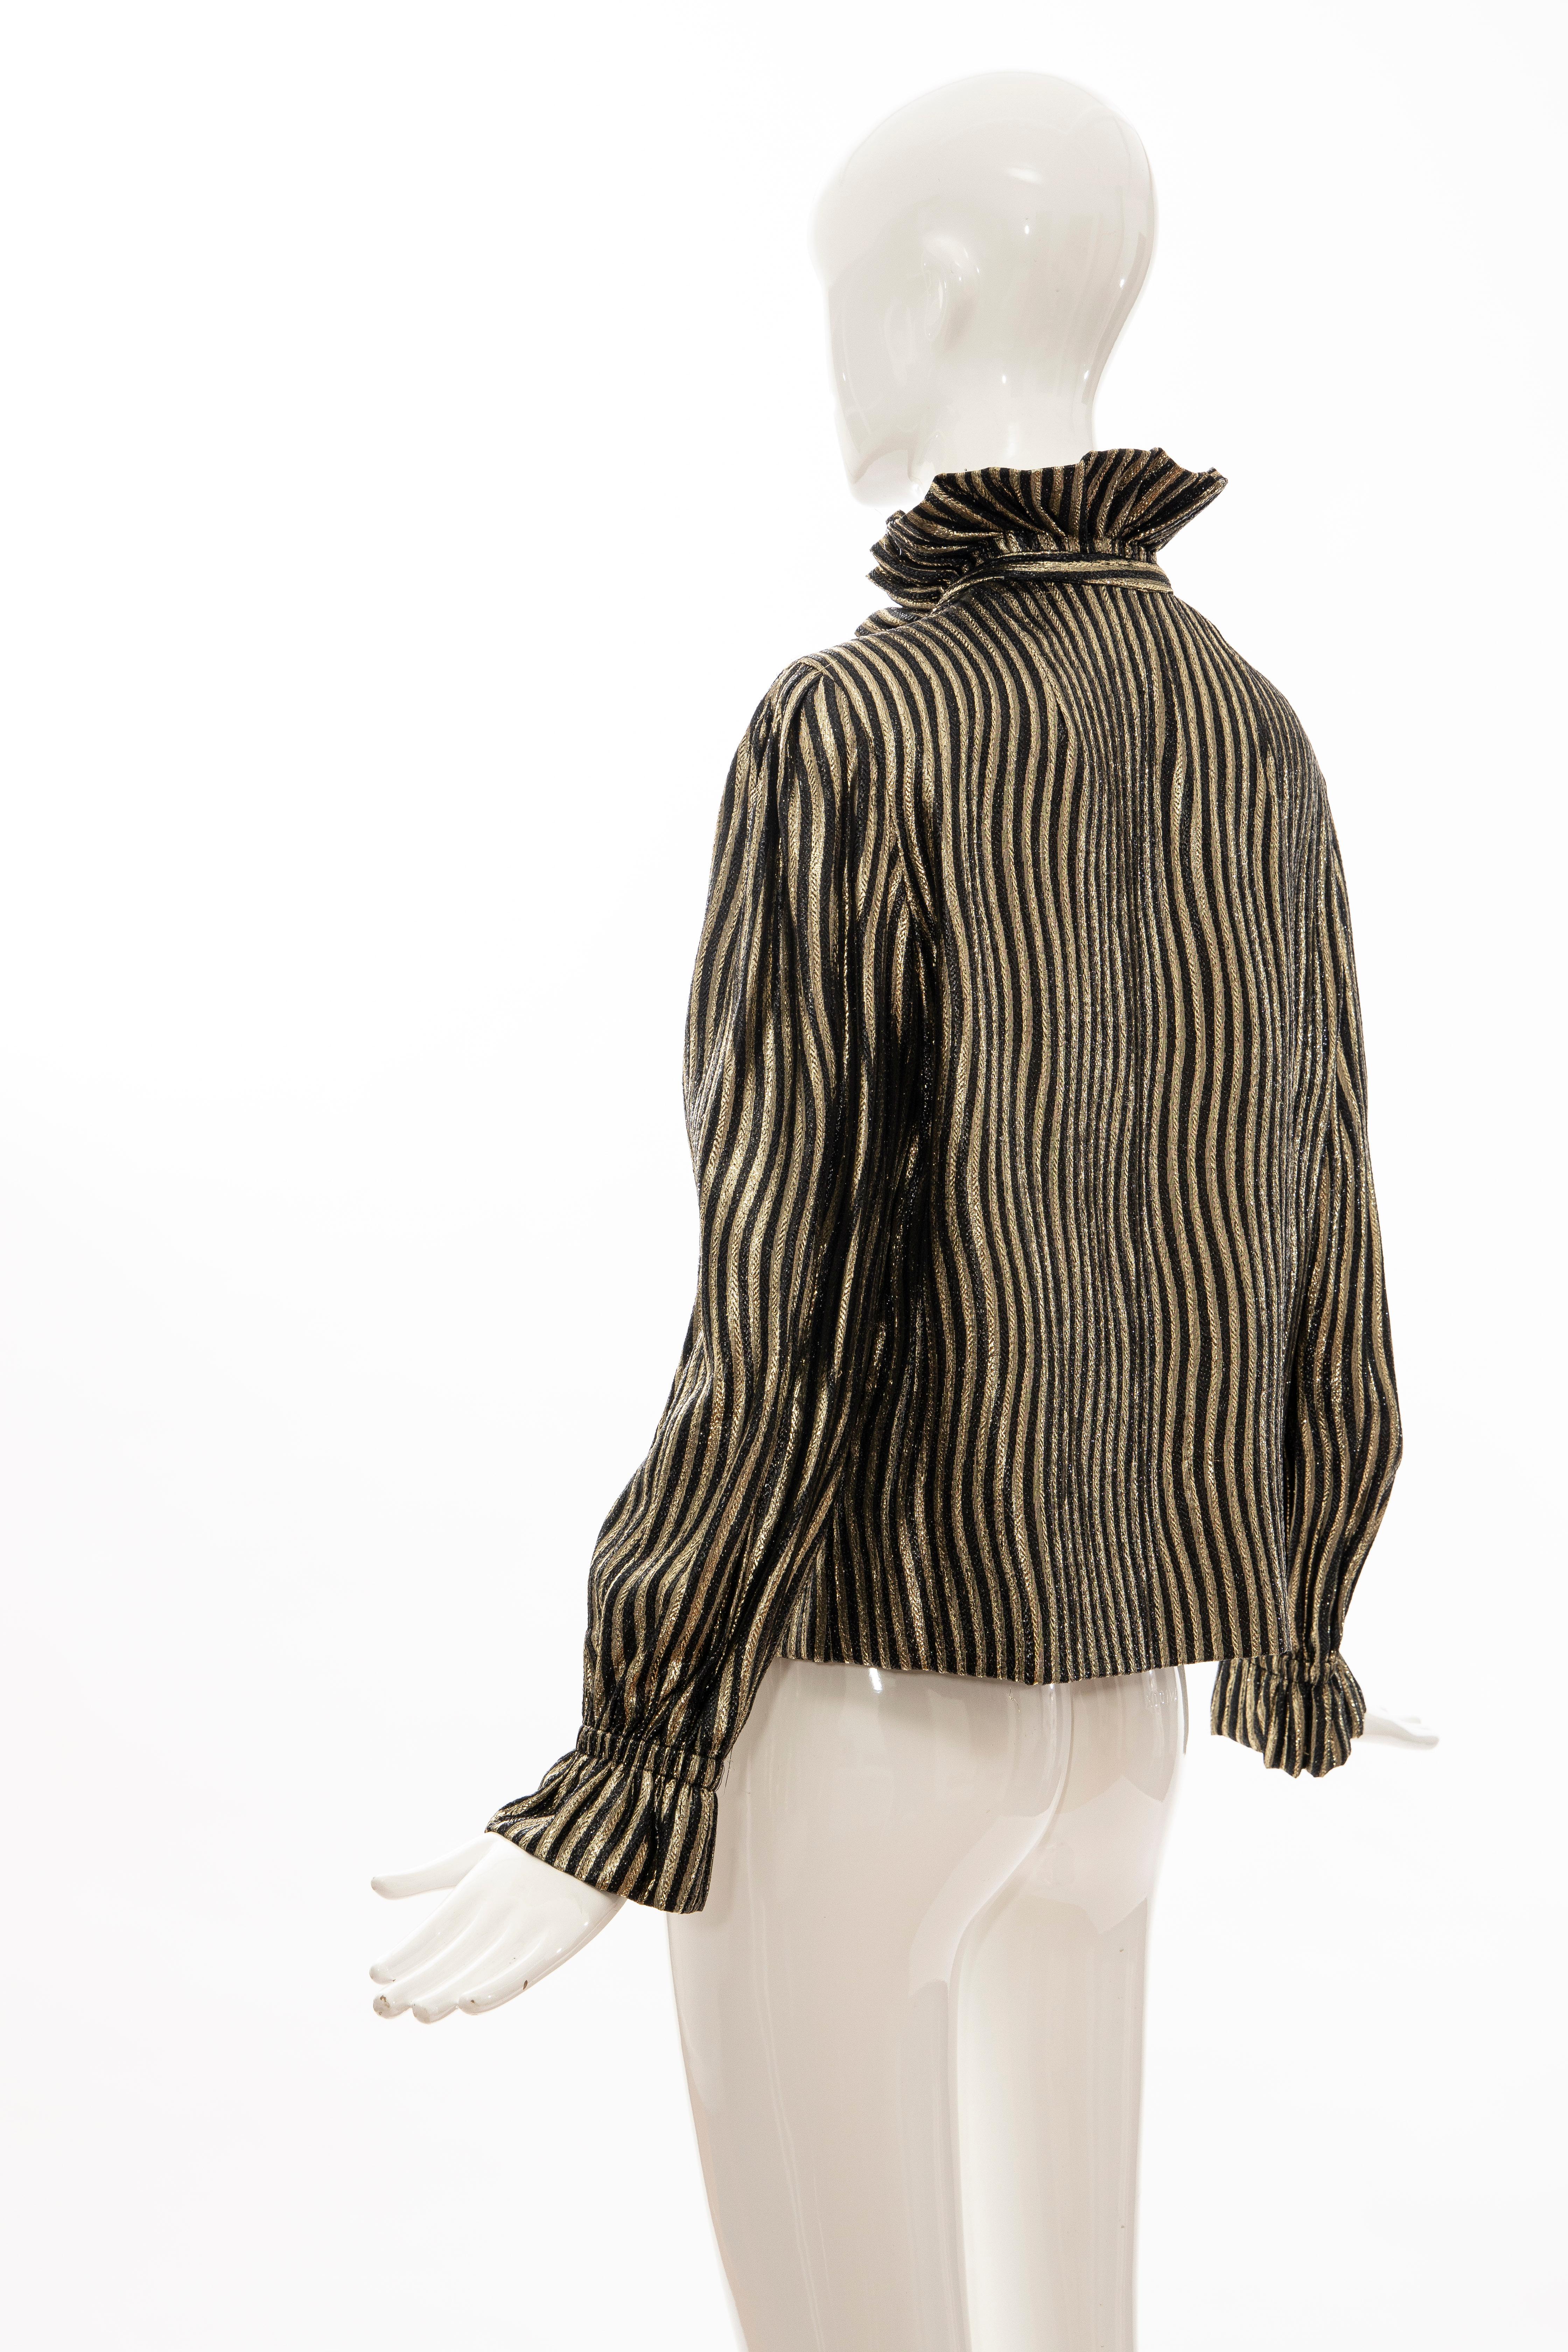 Pauline Trigere Black Gold Striped Metallic Snap Front Blouse, Circa: 1970's For Sale 6